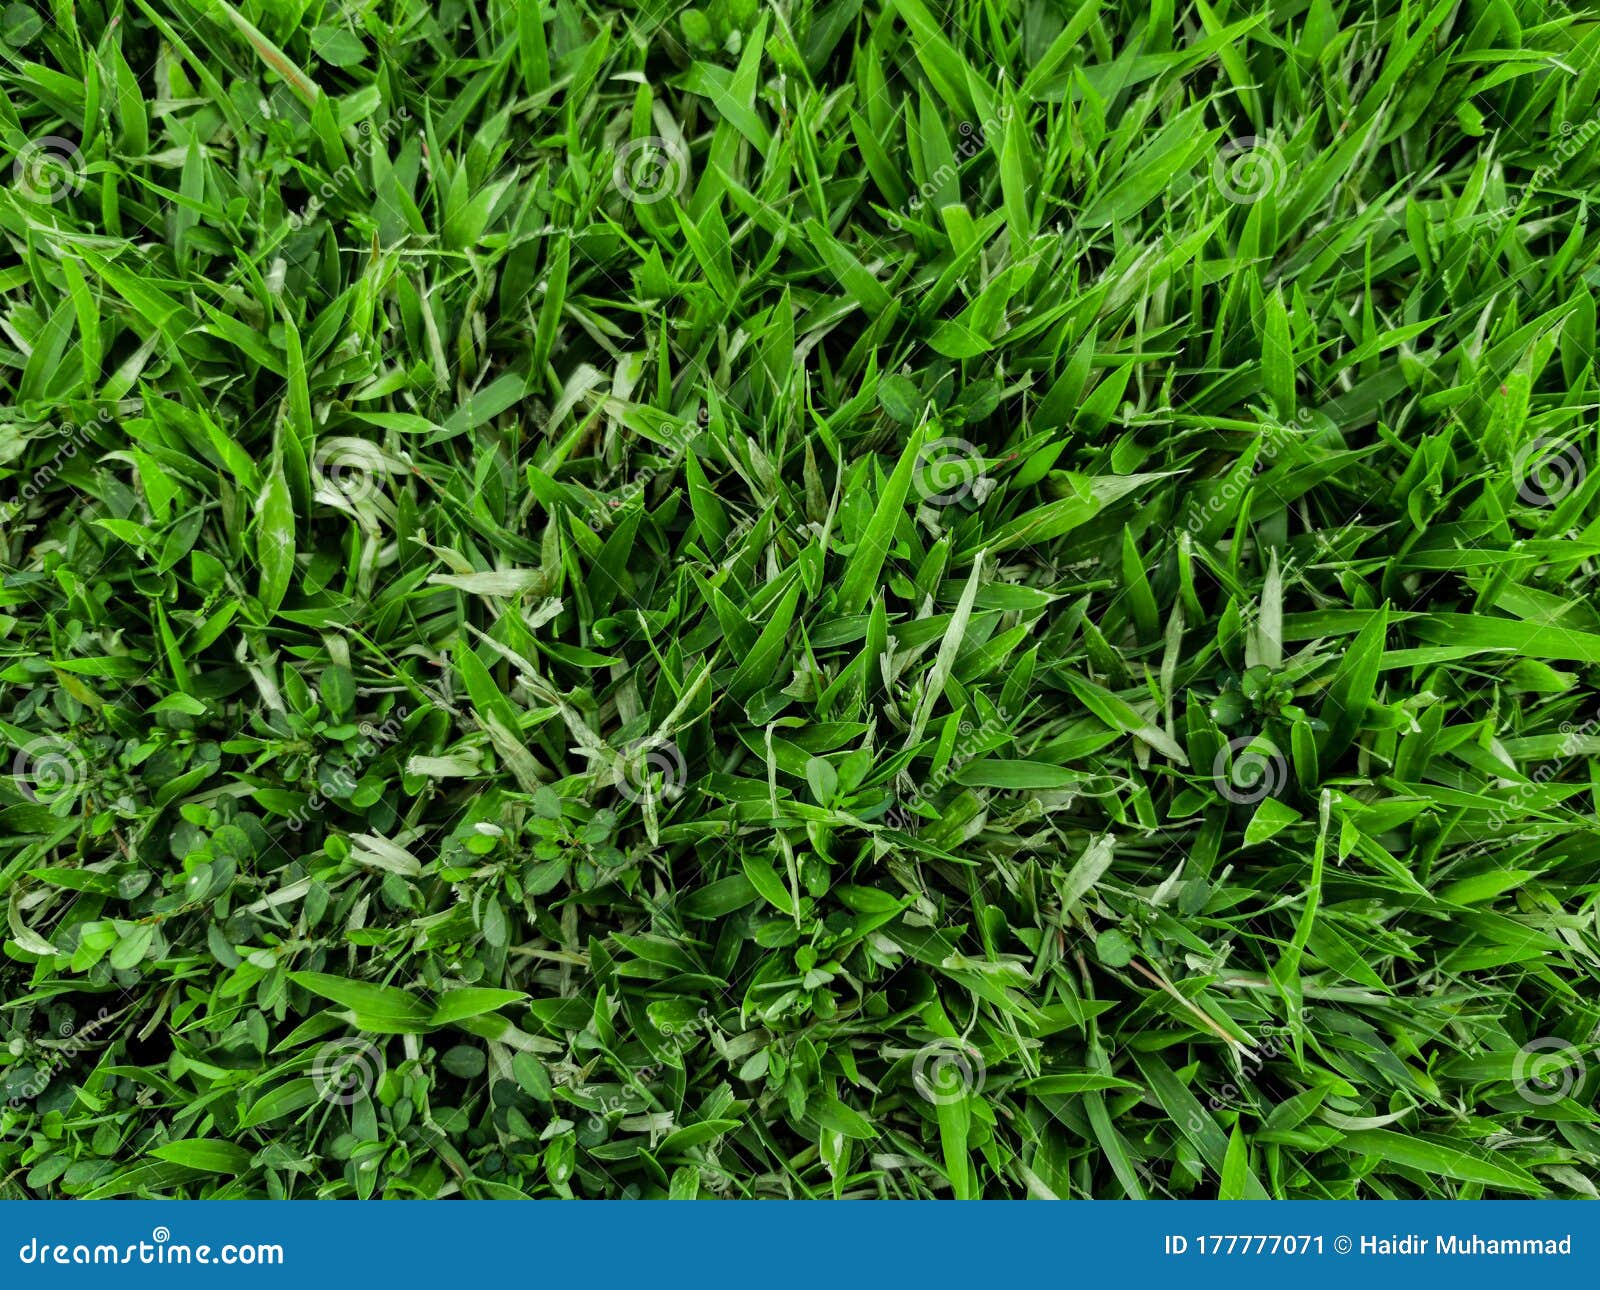 Nature View of Lush Green Grass for Background and Wallpaper. Natural